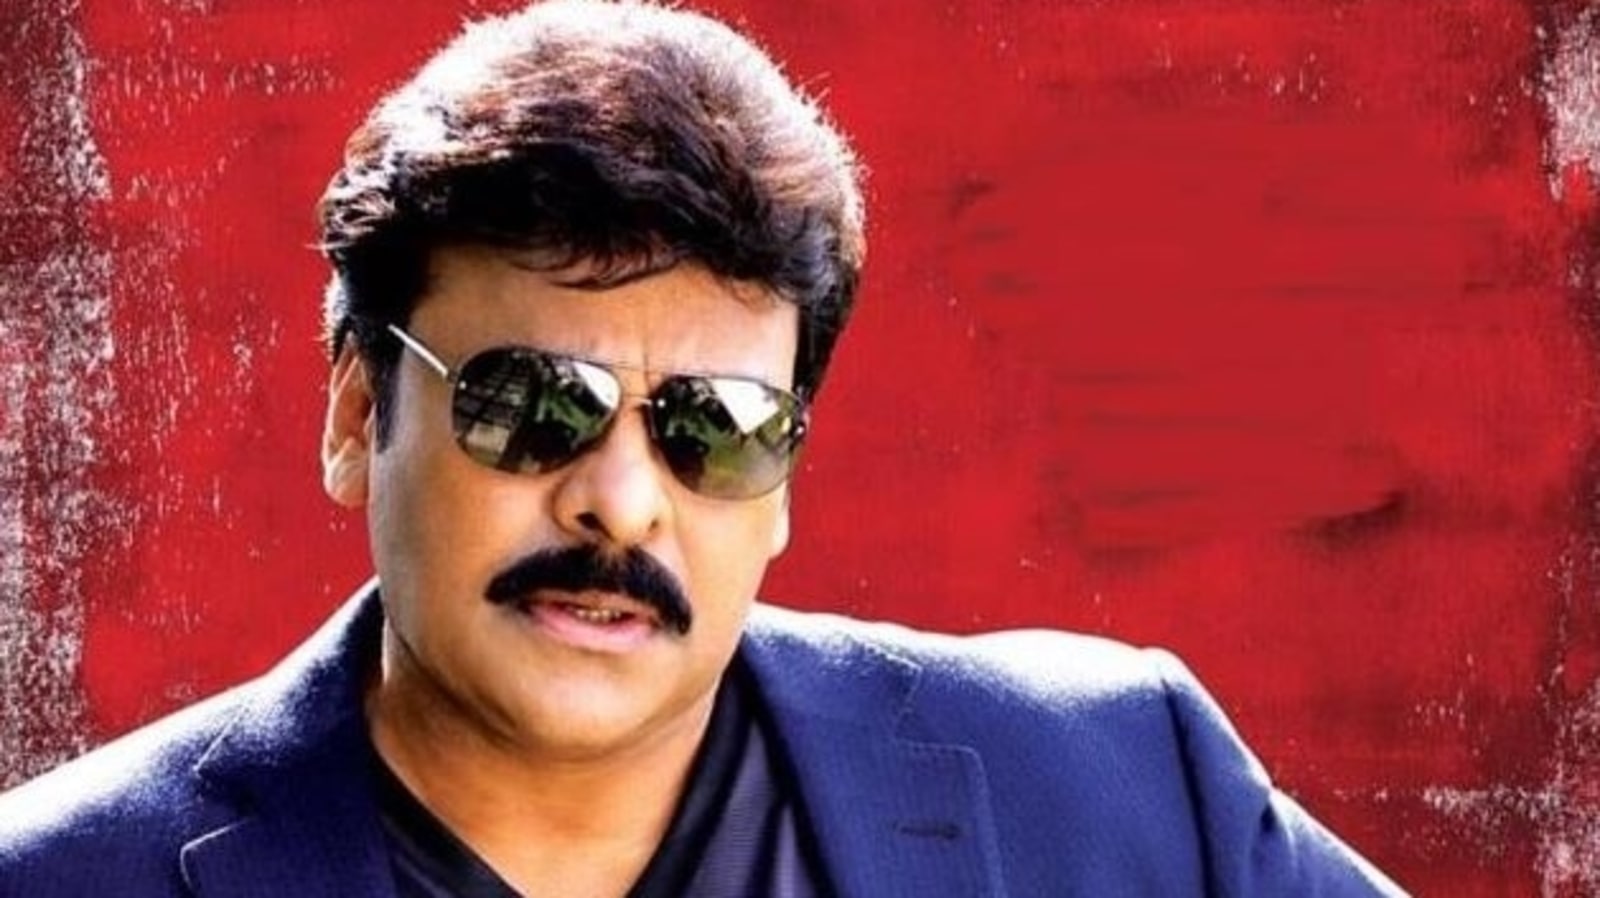 Chiranjeevi opens up about feeling insulted on seeing no mention of ‘South actors’ on wall dedicated to Indian cinema